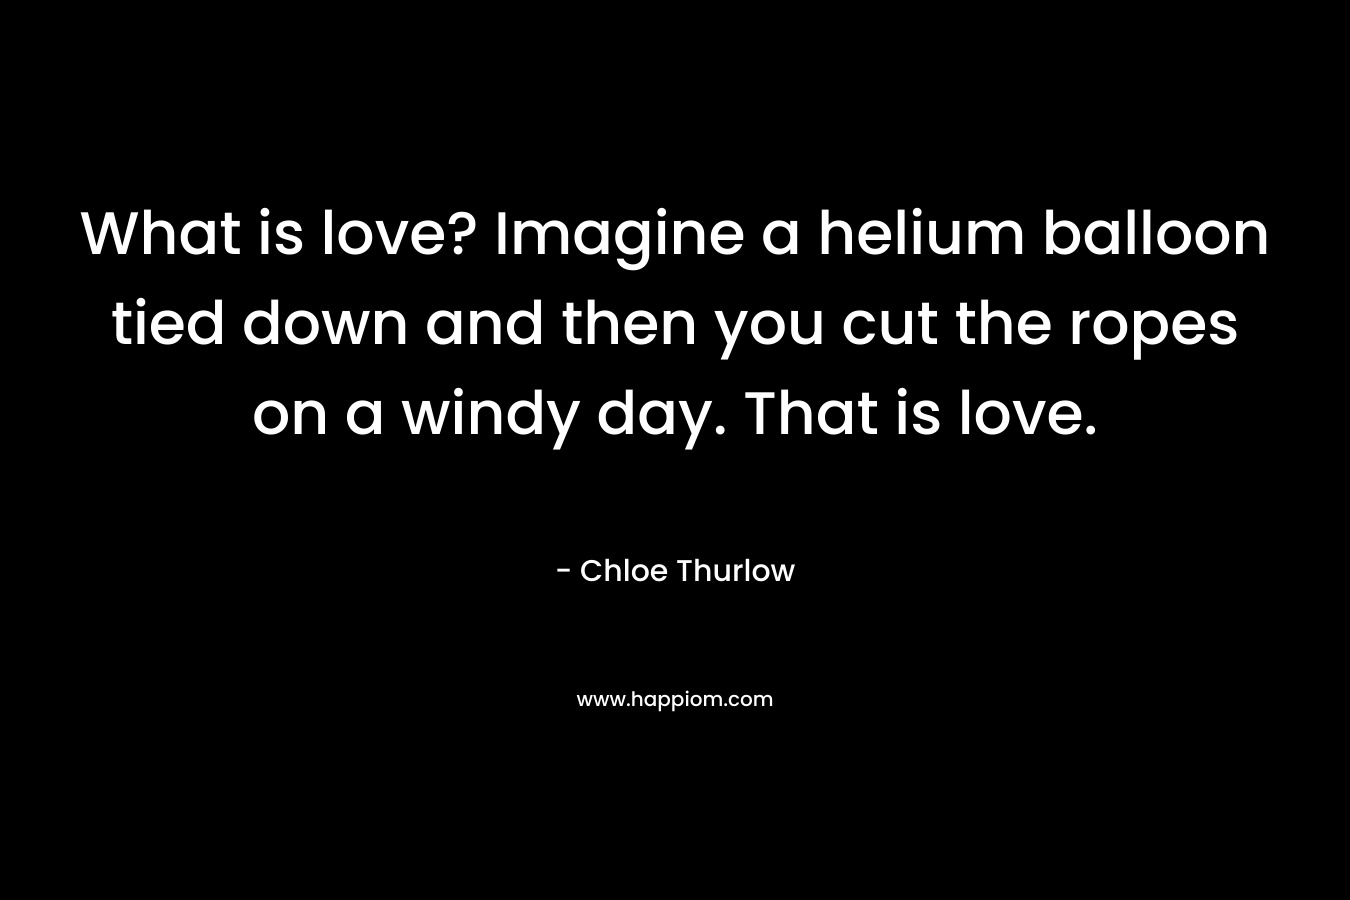 What is love? Imagine a helium balloon tied down and then you cut the ropes on a windy day. That is love. – Chloe Thurlow